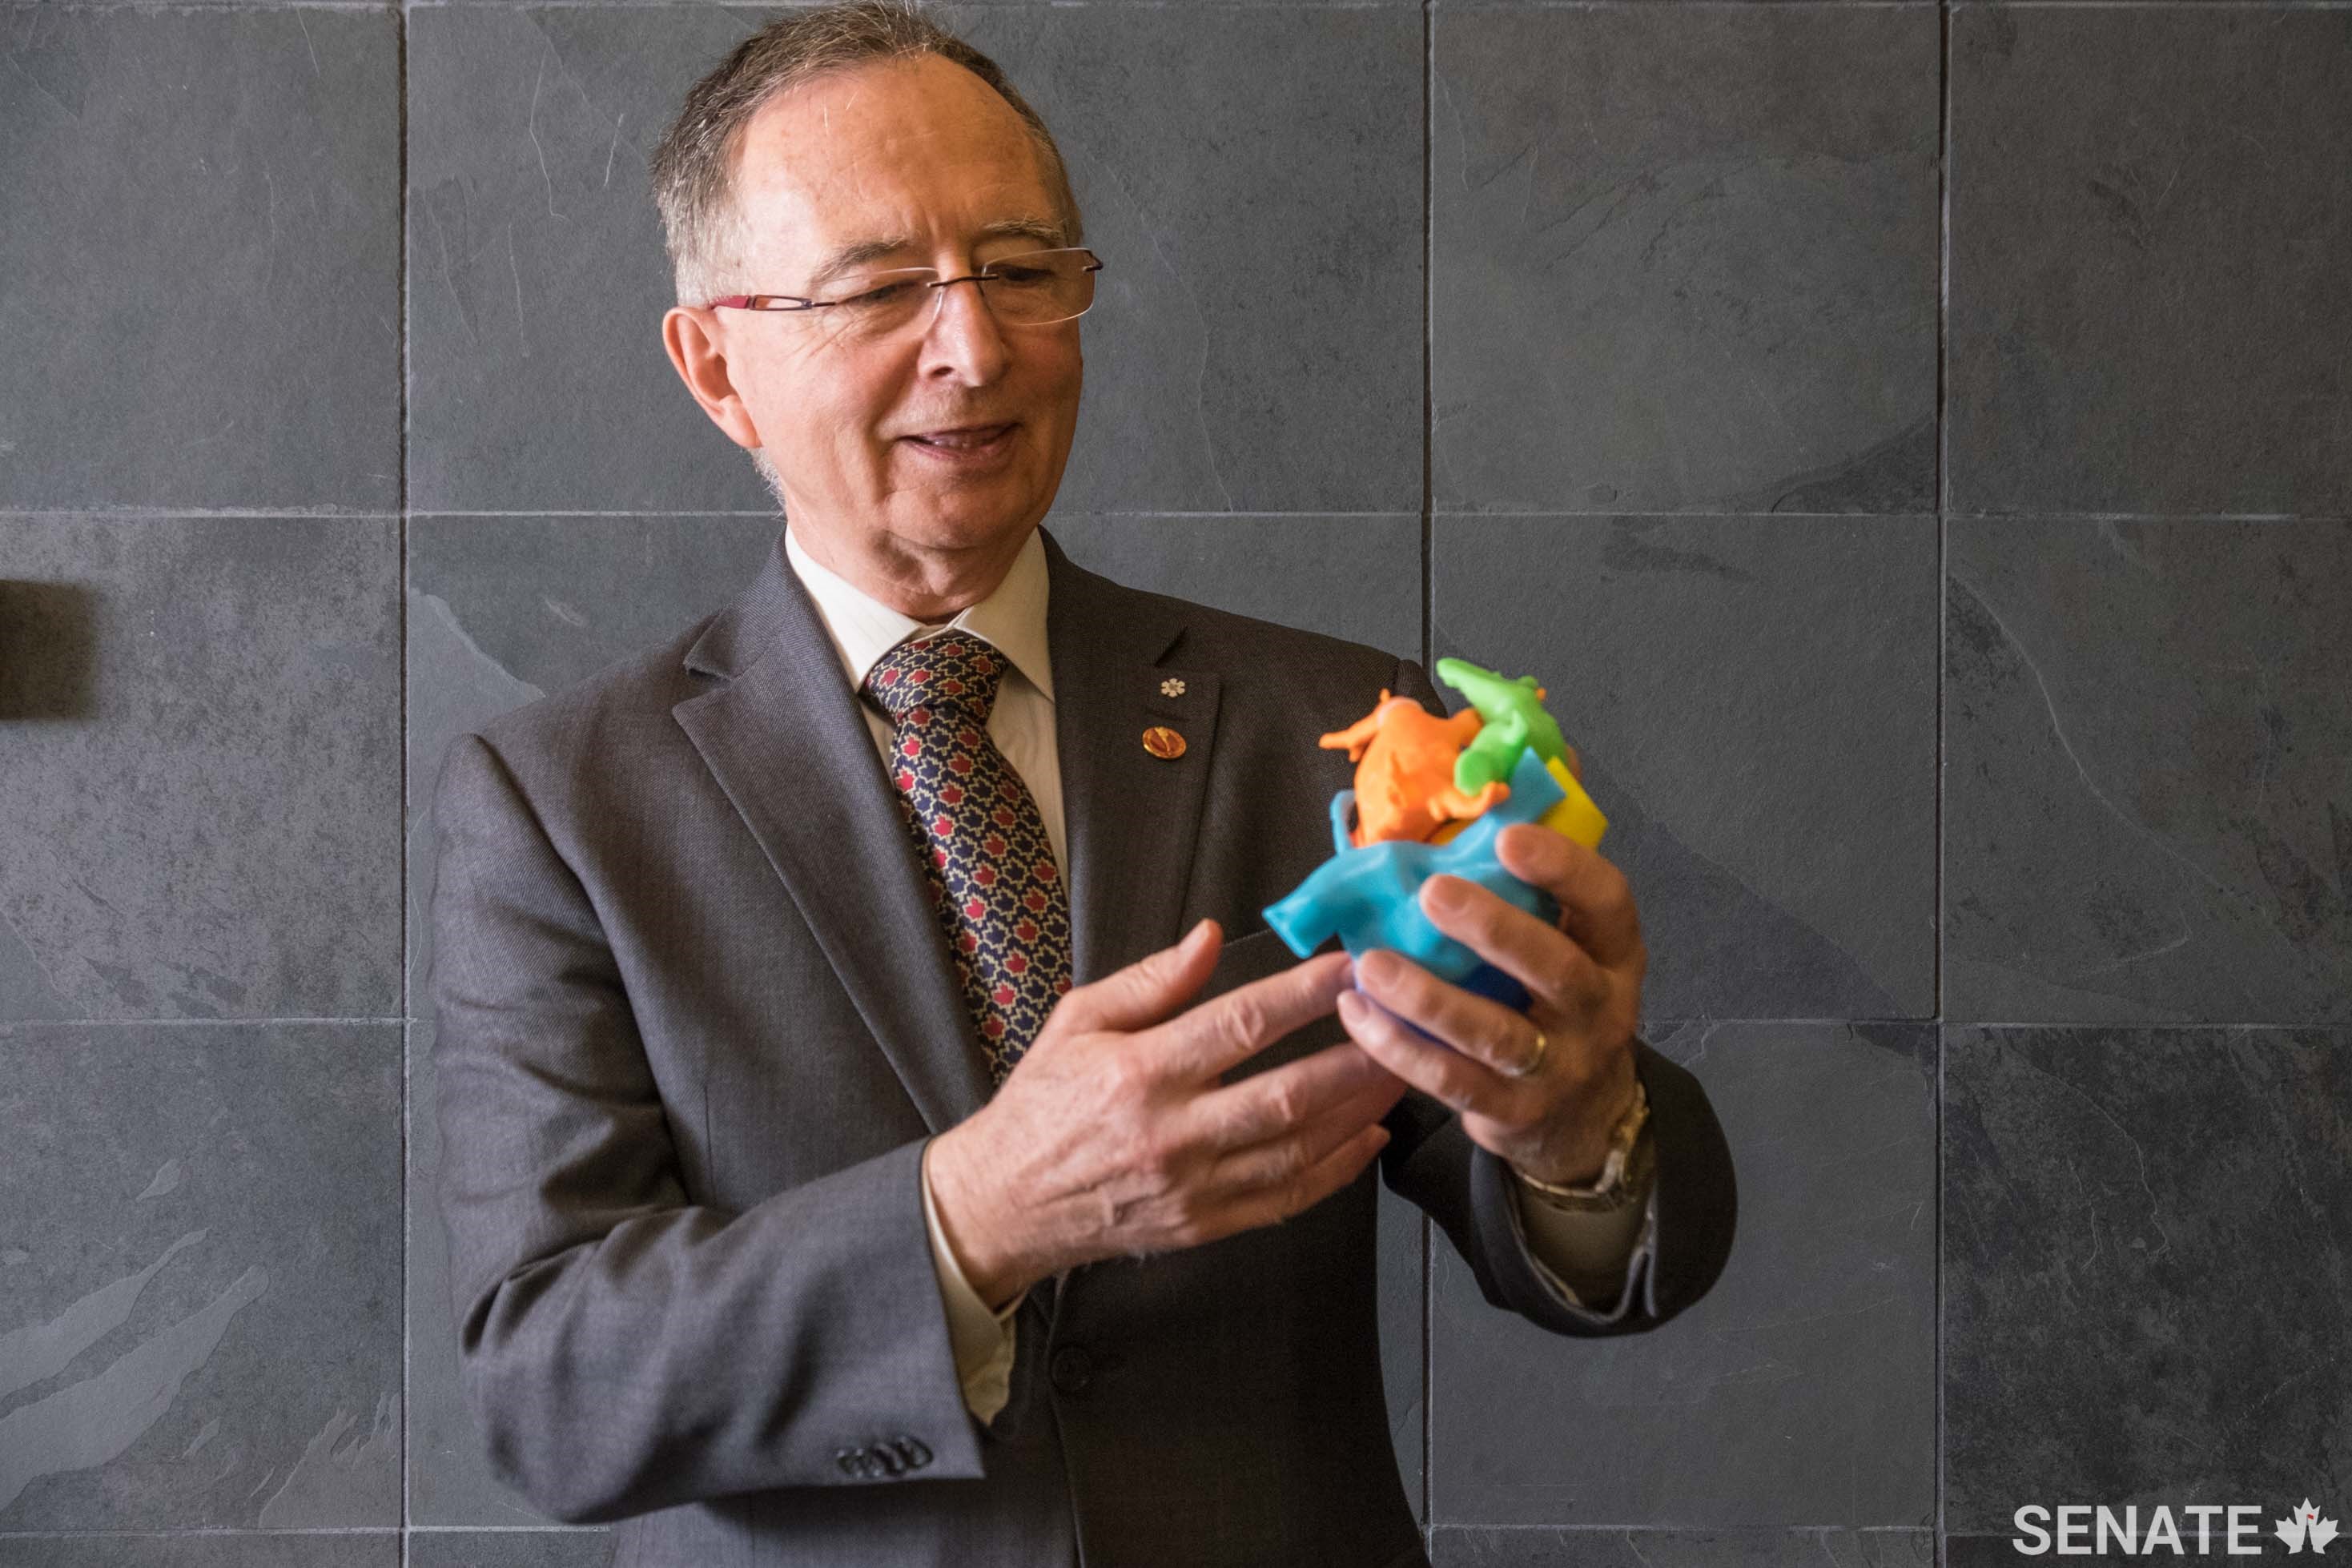 Senator Ogilvie holds a 3D printed heart from Medical Imaging in the Department of Radiology at the Ottawa Hospital, General Campus.